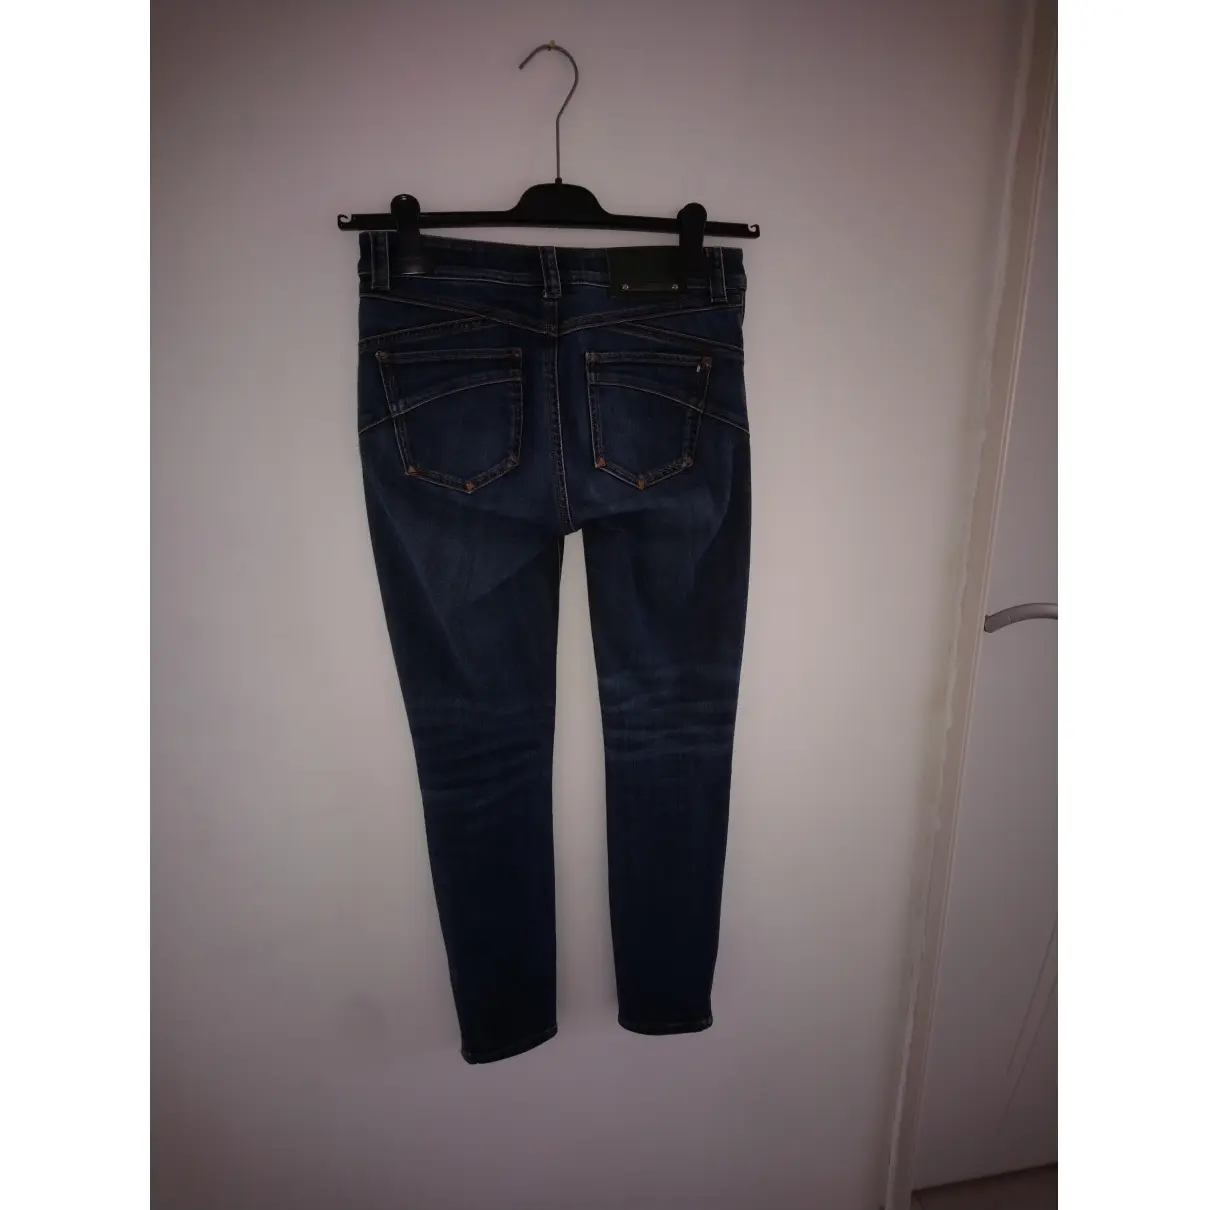 Sportmax Jeans for sale